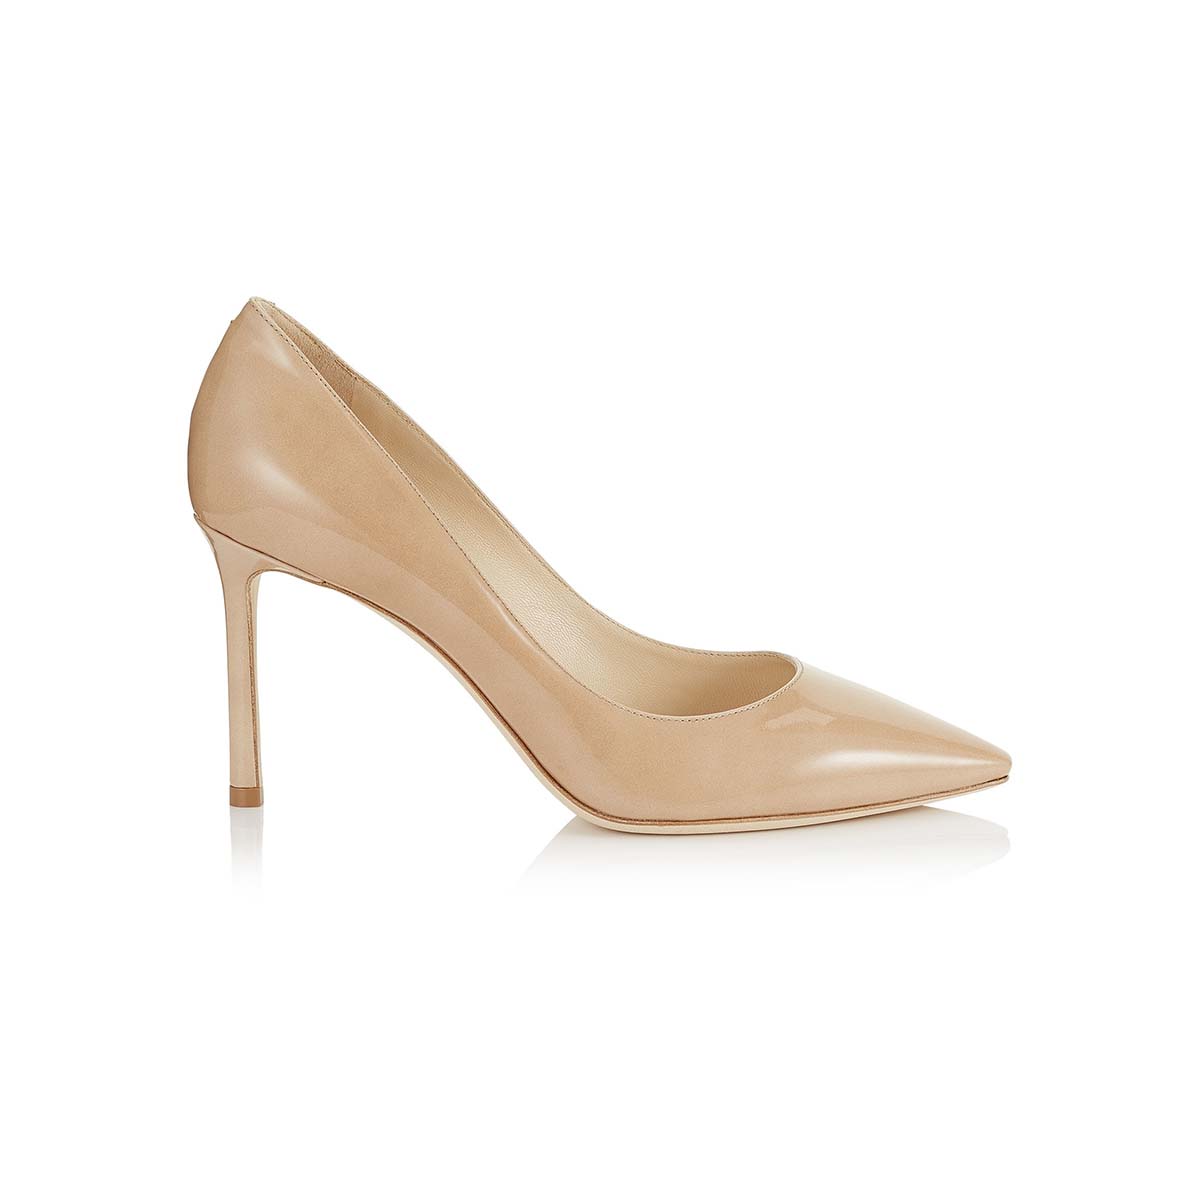 Jimmy Choo Women Romy 85 Patent Leather Pointy Toe Pumps Shoes-Beige